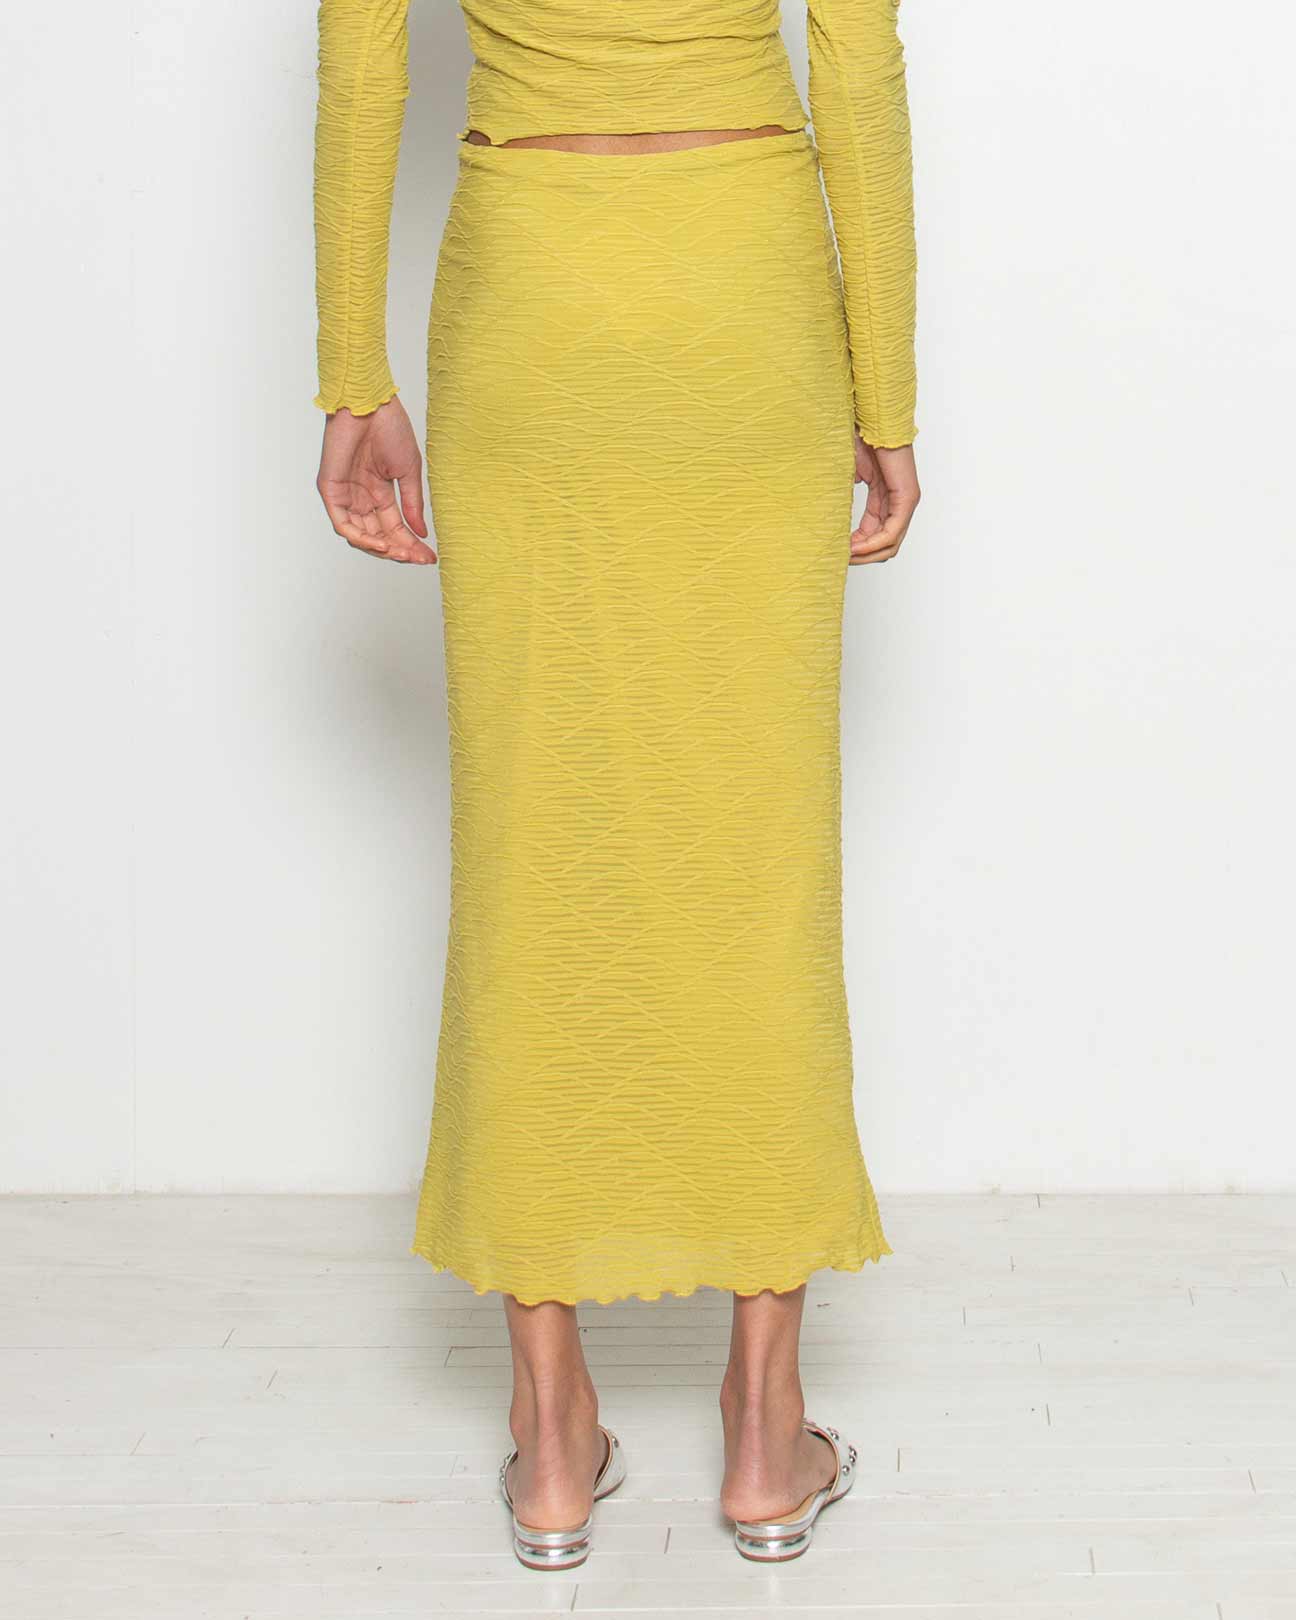 PERSONS Vivi Textured Mesh Midi Skirt in Chartreuse